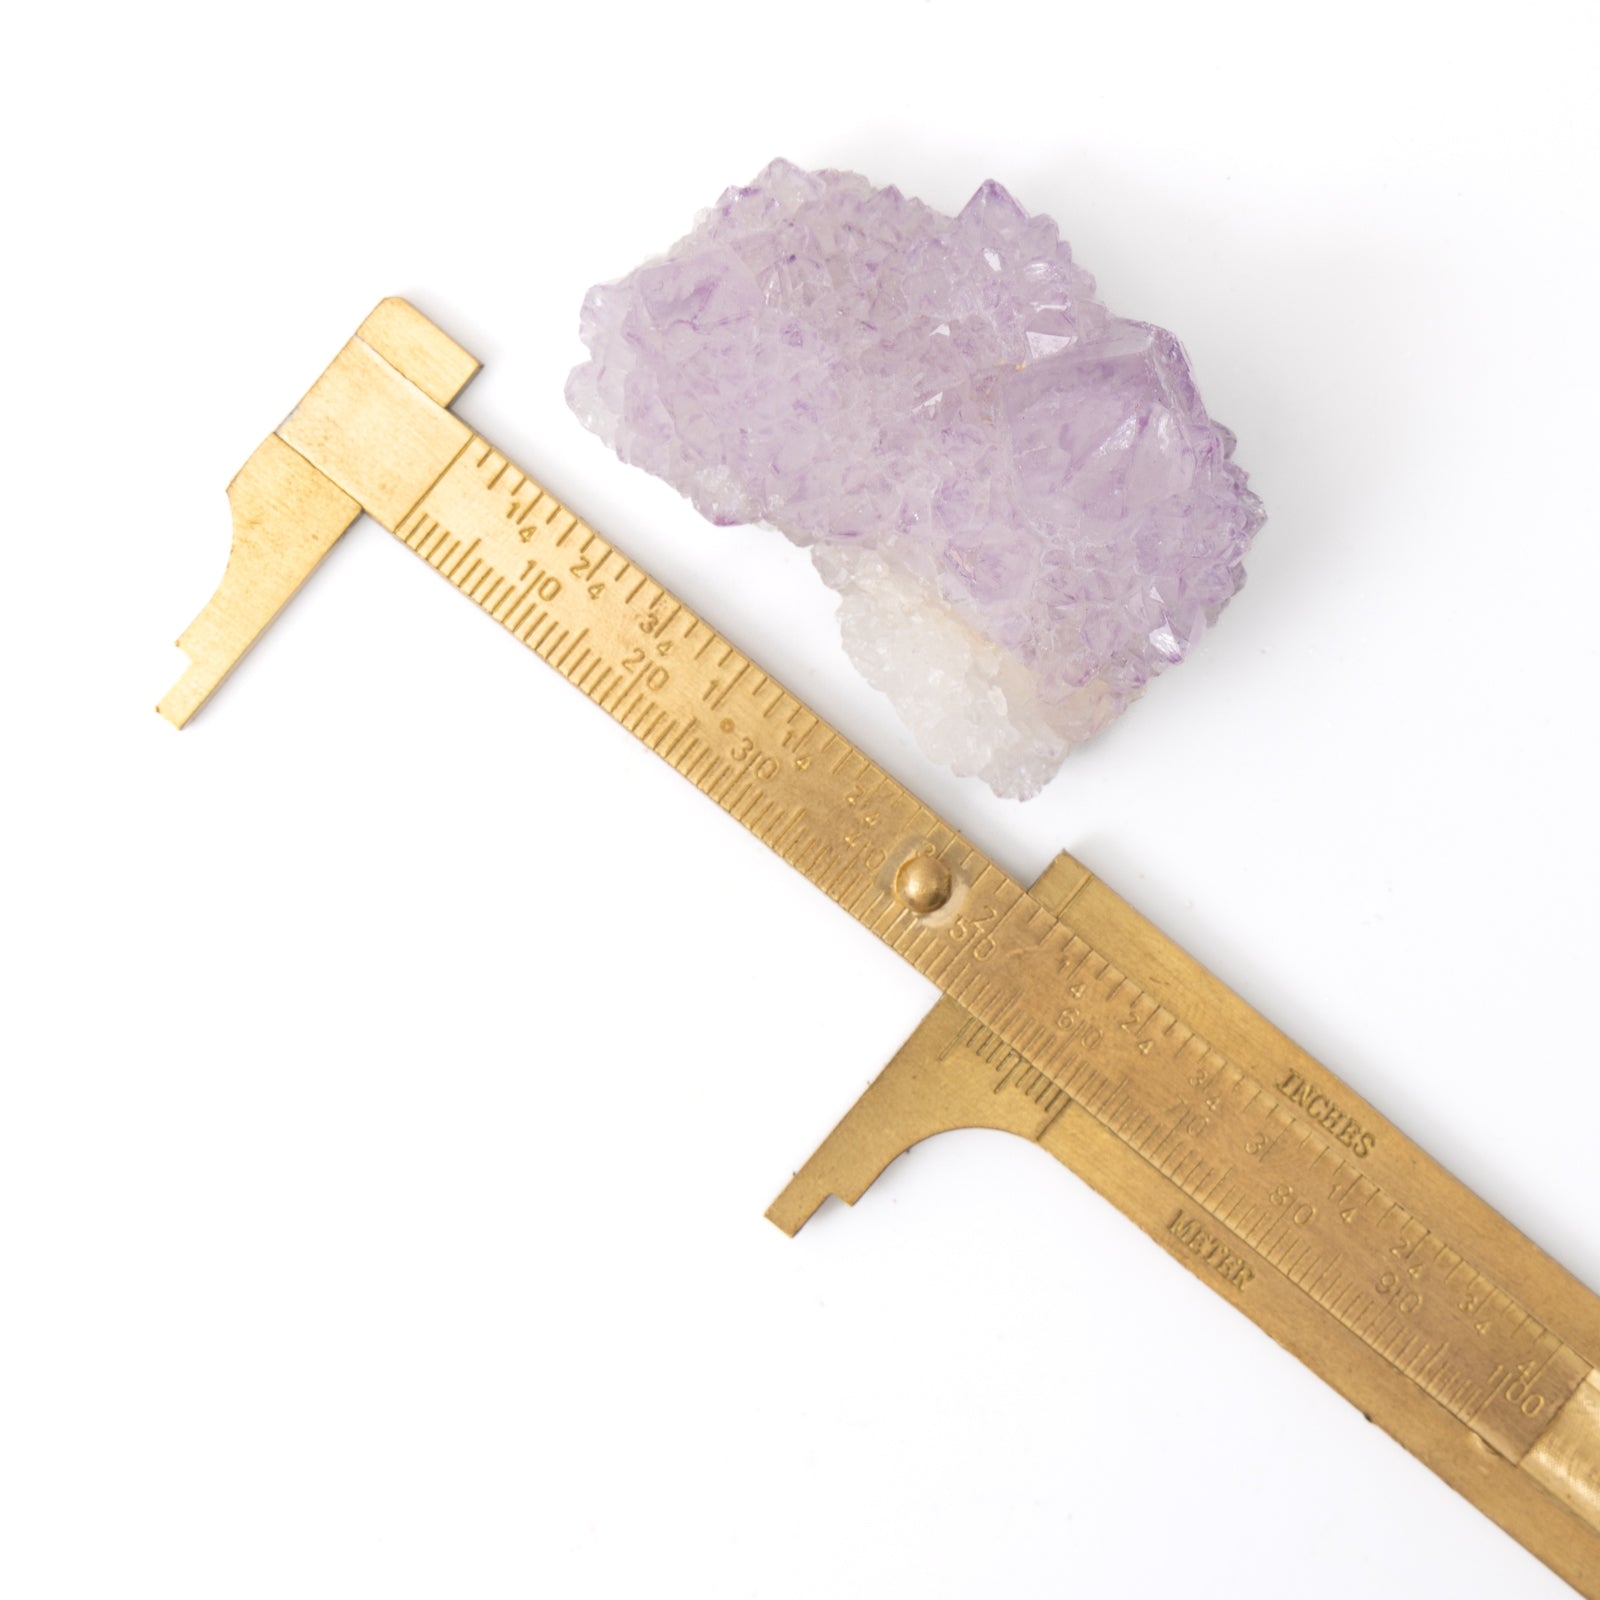 Spirit Quartz crystal, approximately 3.5 inches, showcasing its unique formation and texture, perfect for meditation and healing practices.